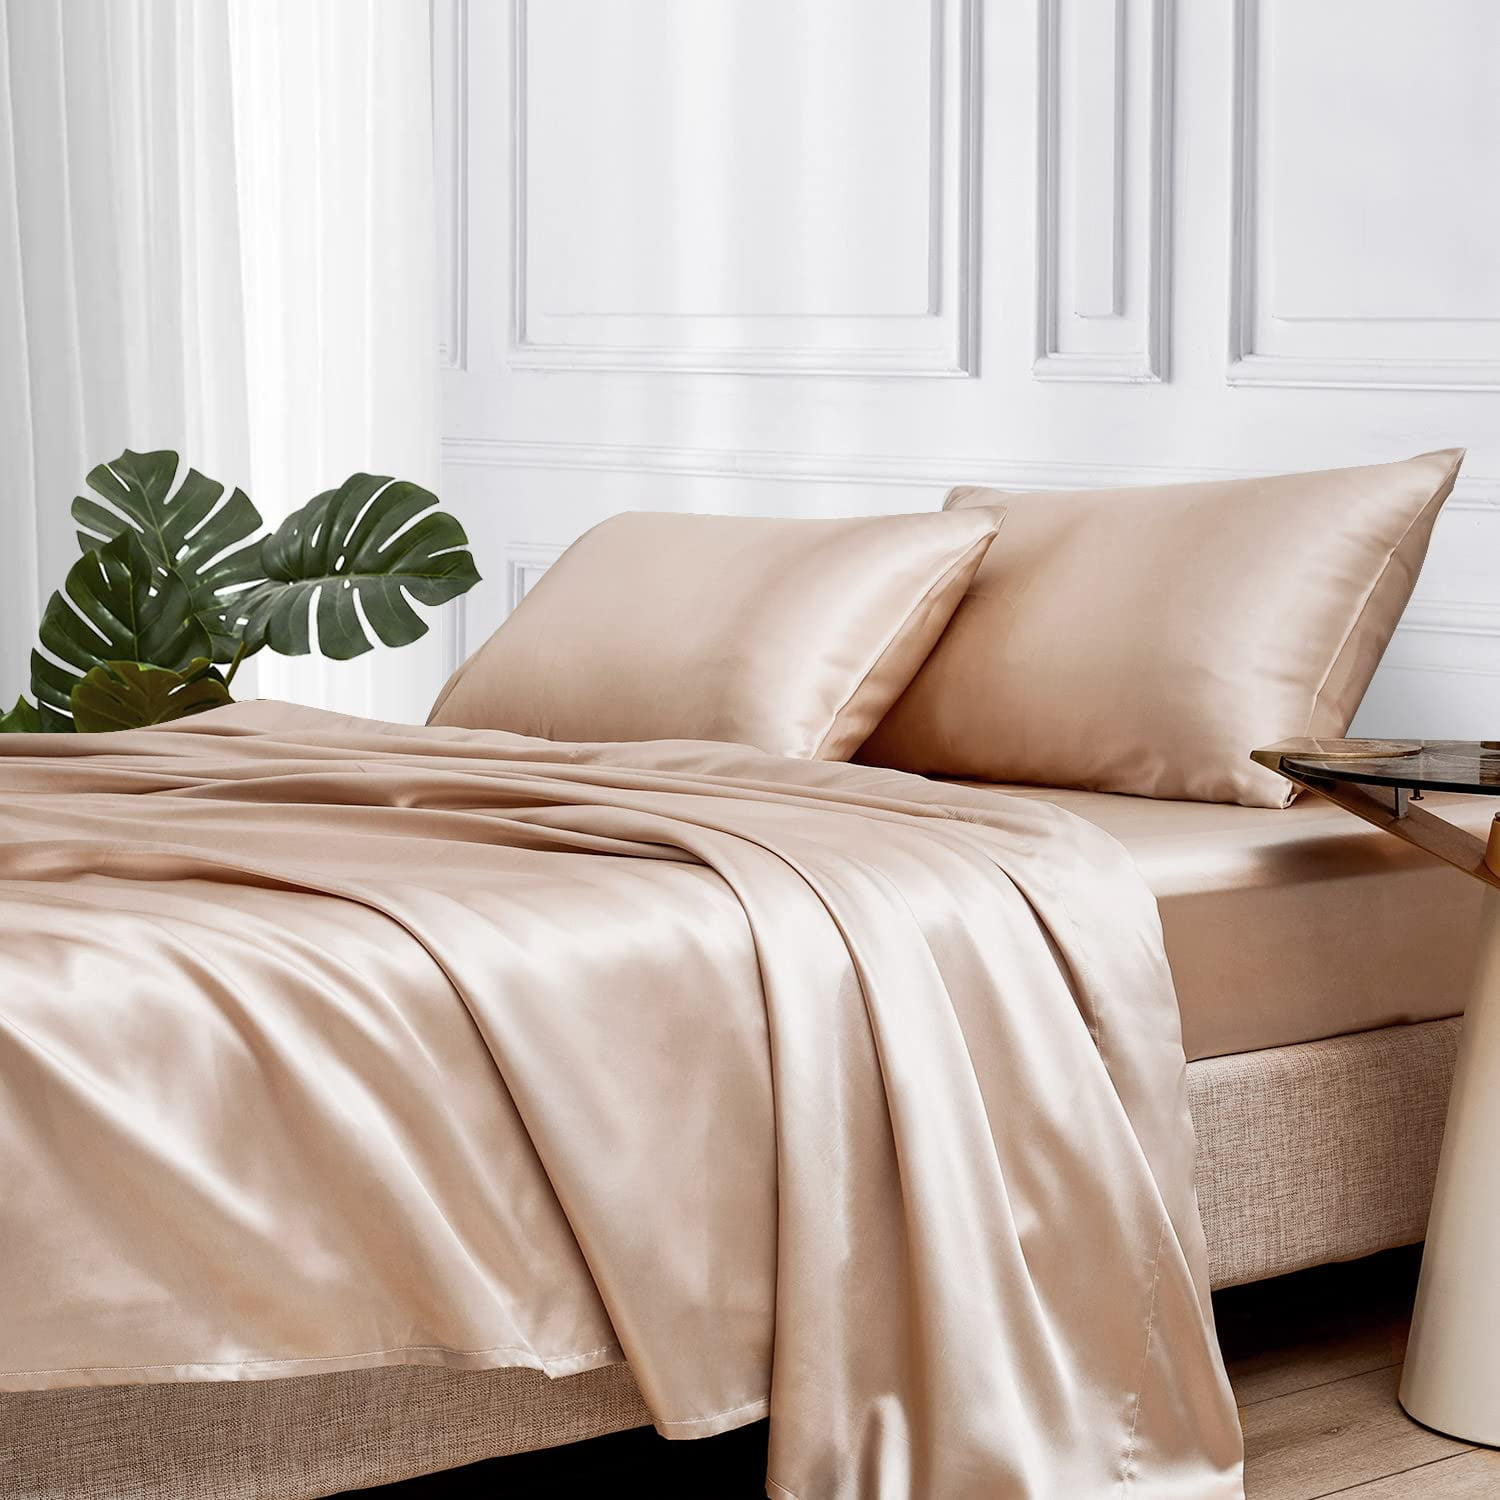 Satin Sheets California King Piece Champagne Pink Hotel